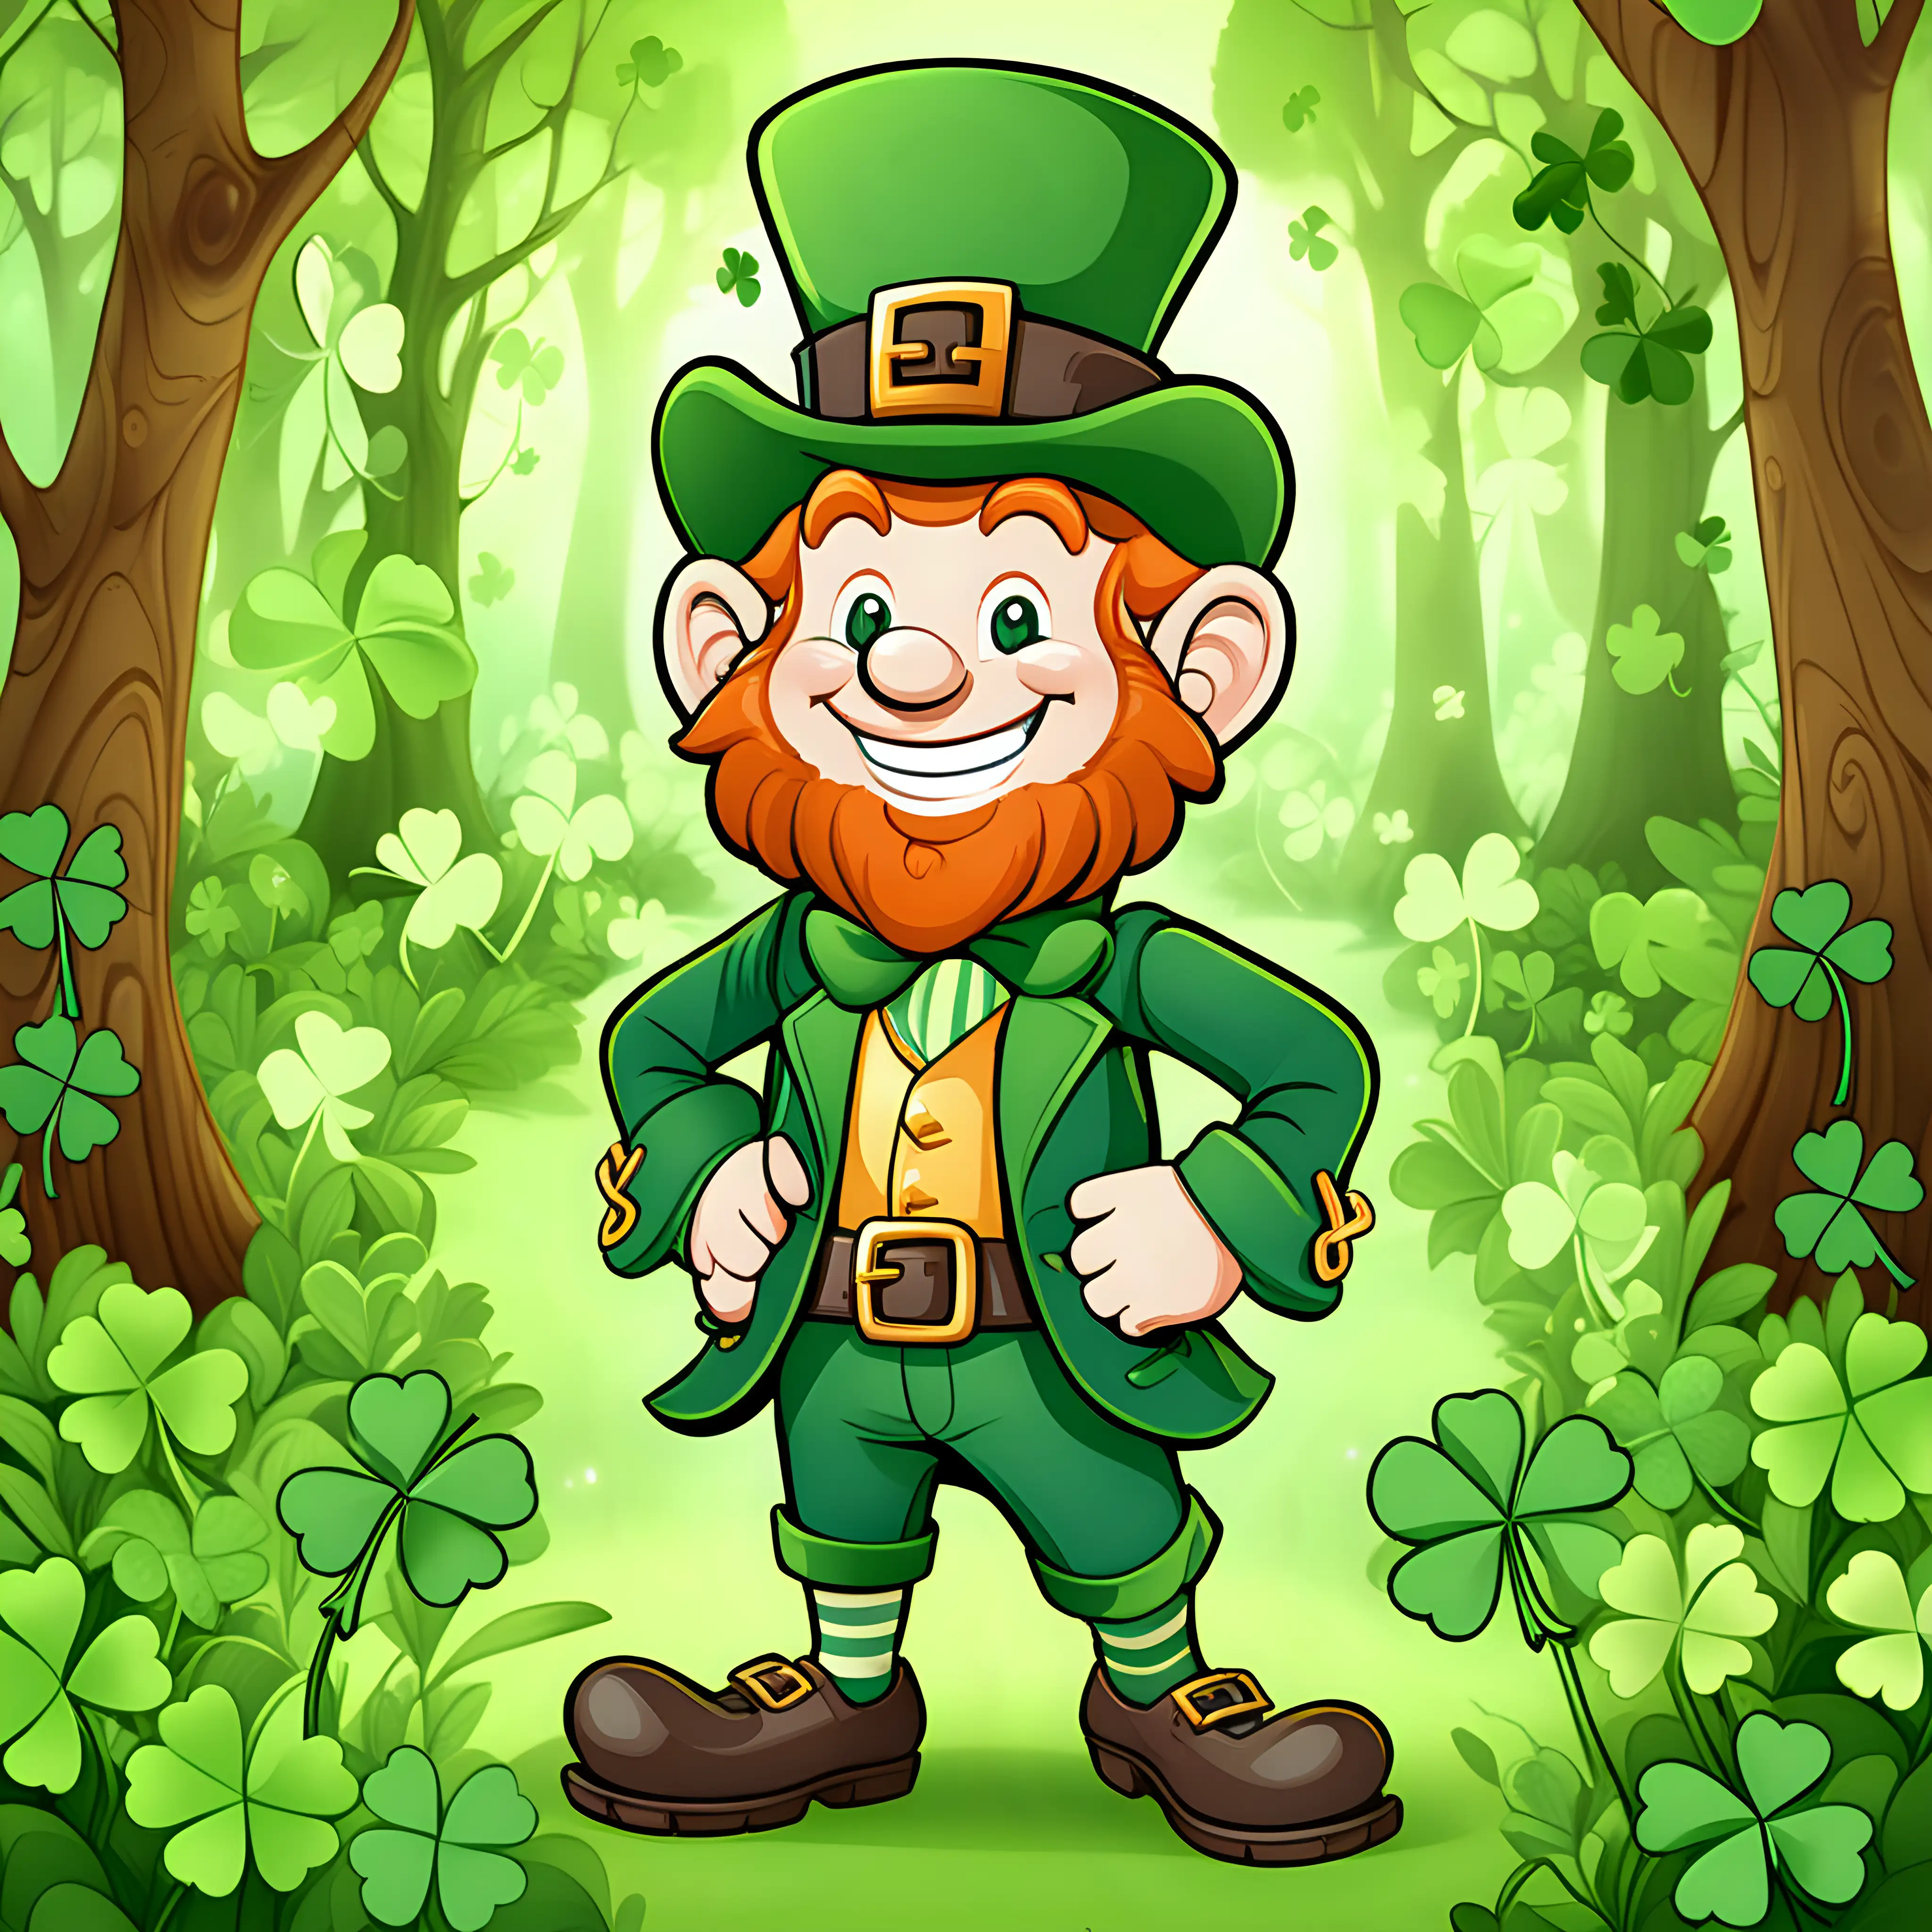 Happy, leprechaun, standing in lush, green forest with four leaf, clovers, cartoon style